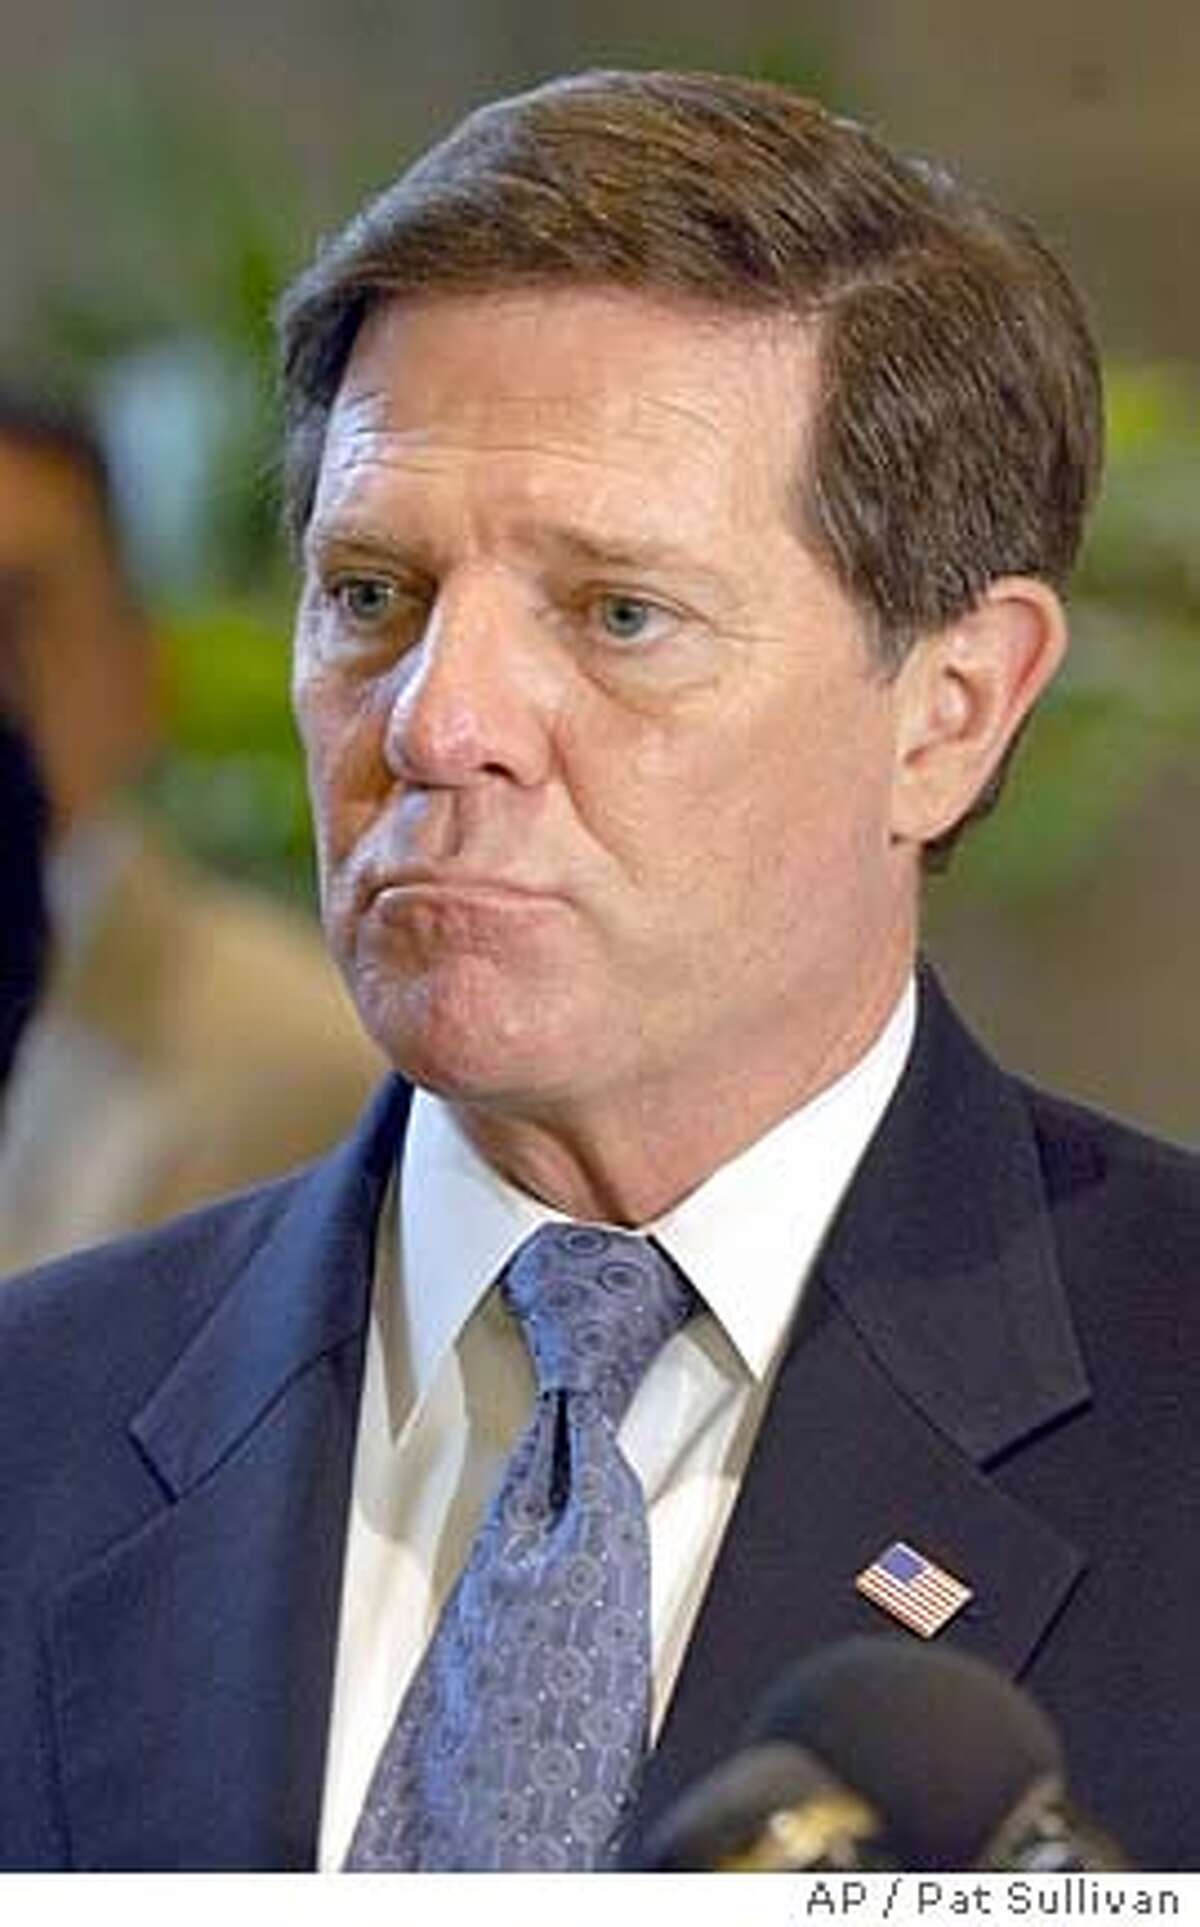 **FILE**House Majority Leader Tom DeLay ponders a question during a press conference in Houston in this Oct. 22, 2004 file photo. House Republicans suddenly reversed course Monday, Jan. 3, 2005 deciding to retain a tough standard for lawmaker discipline and reinstating a rule that would force Majority Leader Tom DeLay to step aside if indicted by a Texas grand jury. (AP Photo/Pat Sullivan) FILE